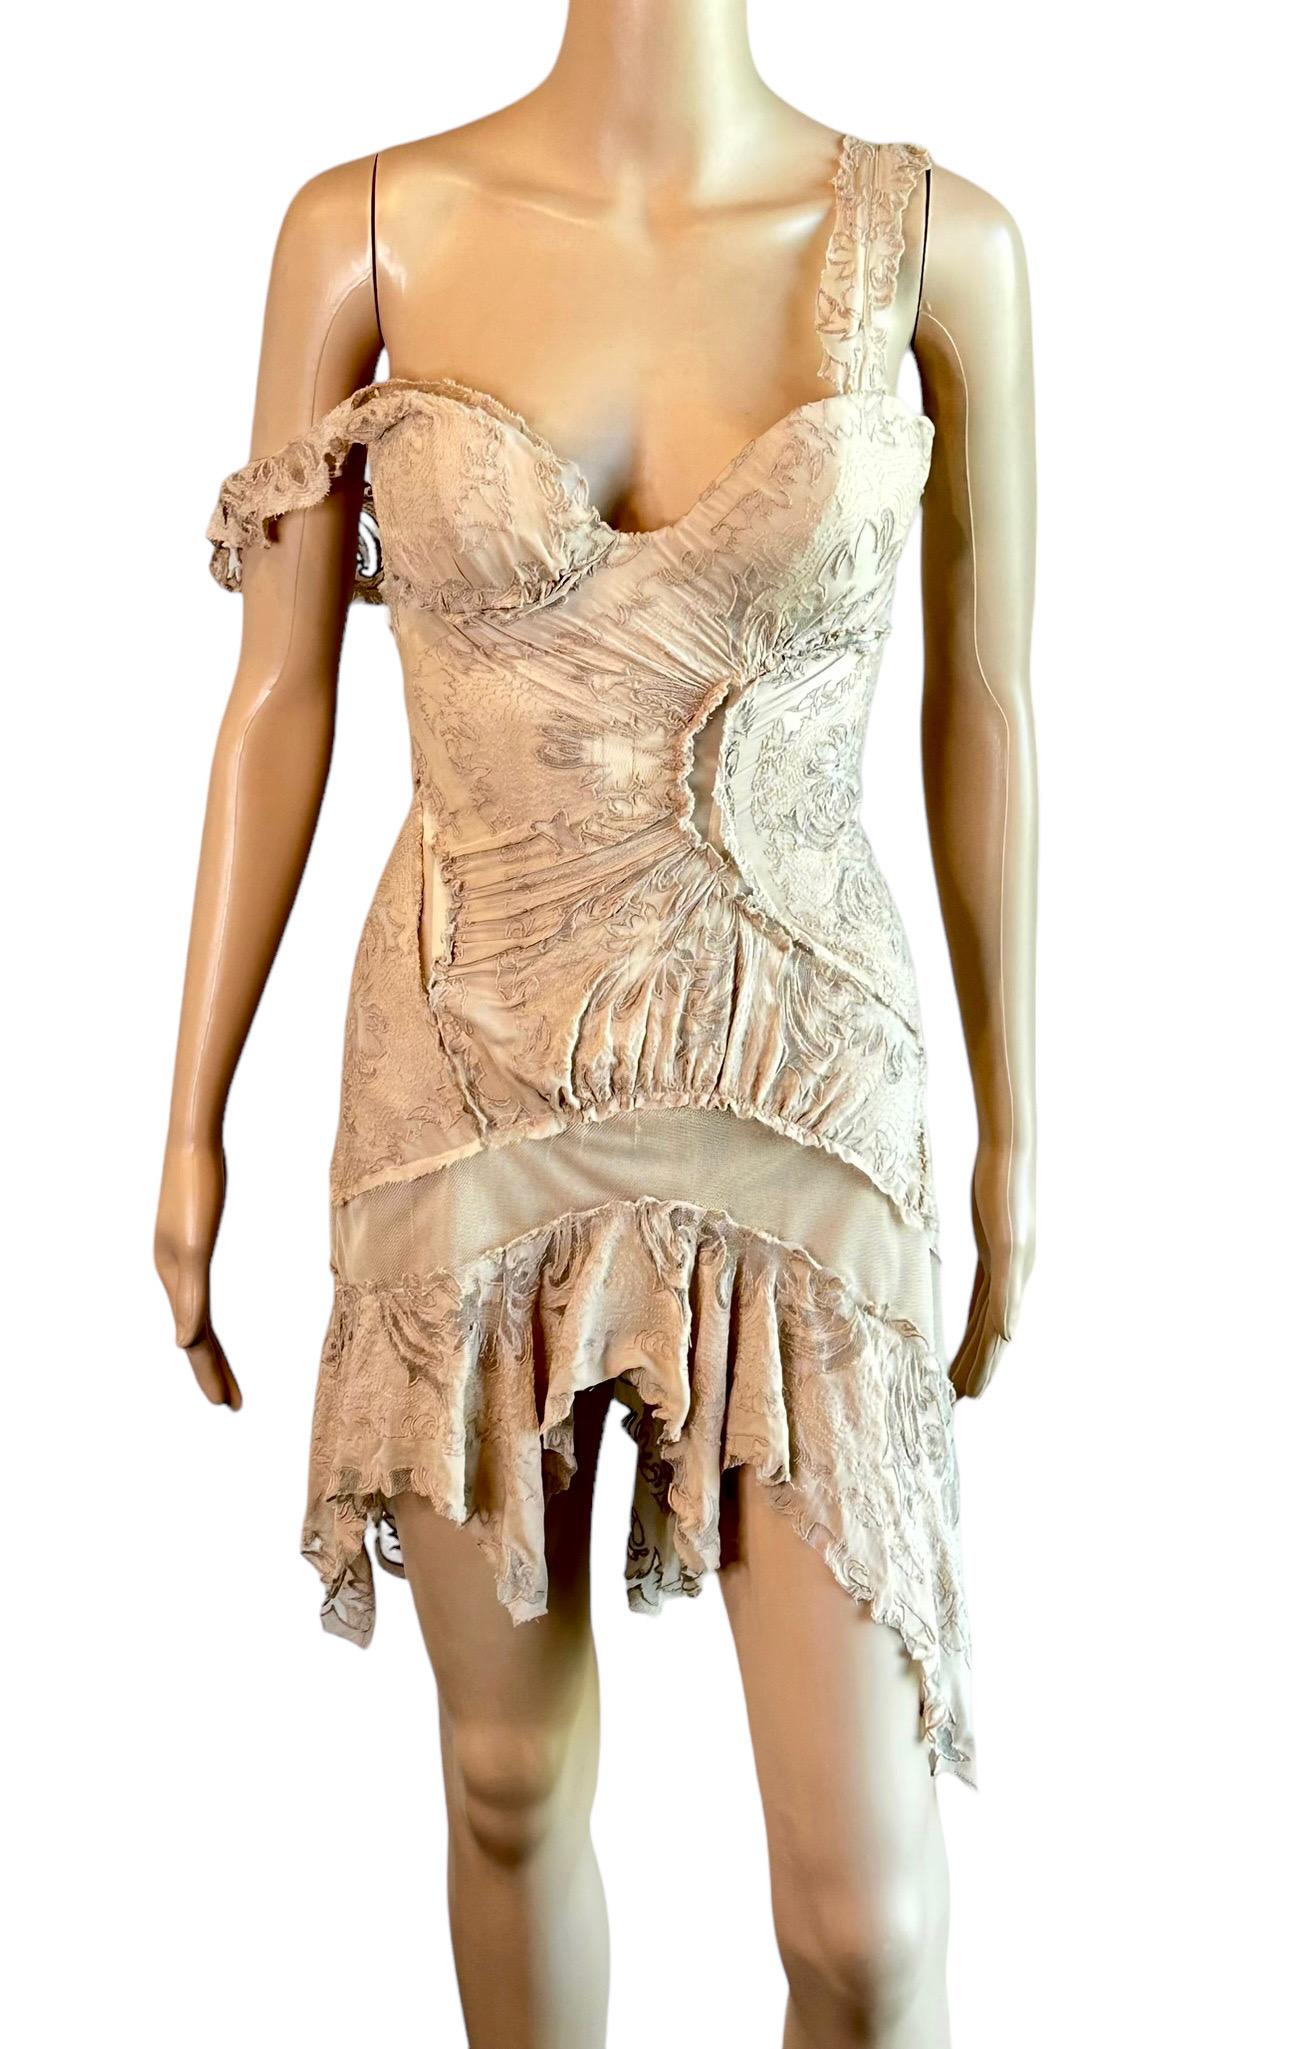 Roberto Cavalli S/S 2003 Runway Corset Bustier Sheer Mesh Panels Mini Dress Size M

Look 49 from the Spring 2003 Collection

FOLLOW US ON INSTAGRAM @OPULENTADDICT